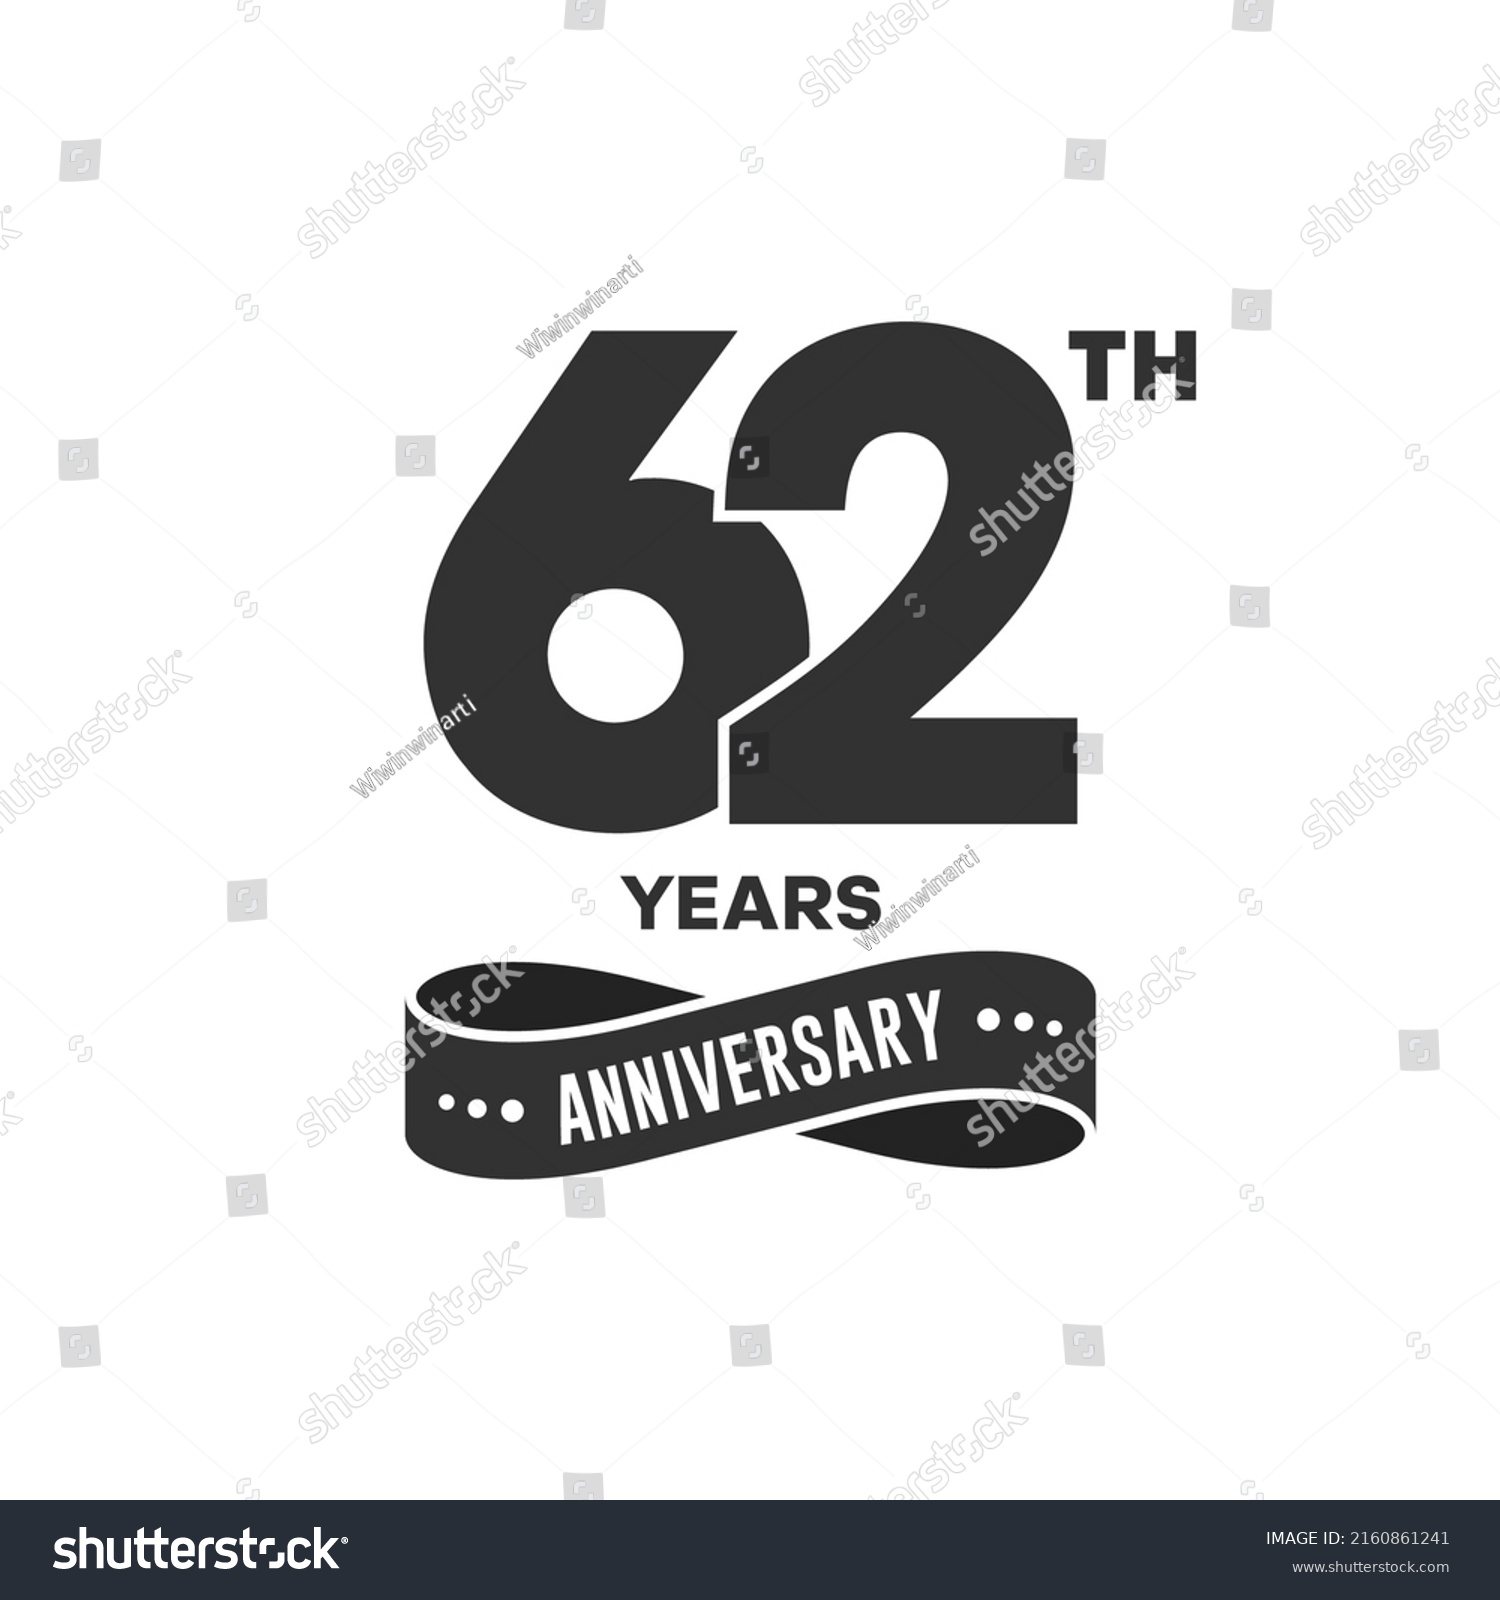 62 Years Anniversary Logo Black Color Stock Vector (Royalty Free ...